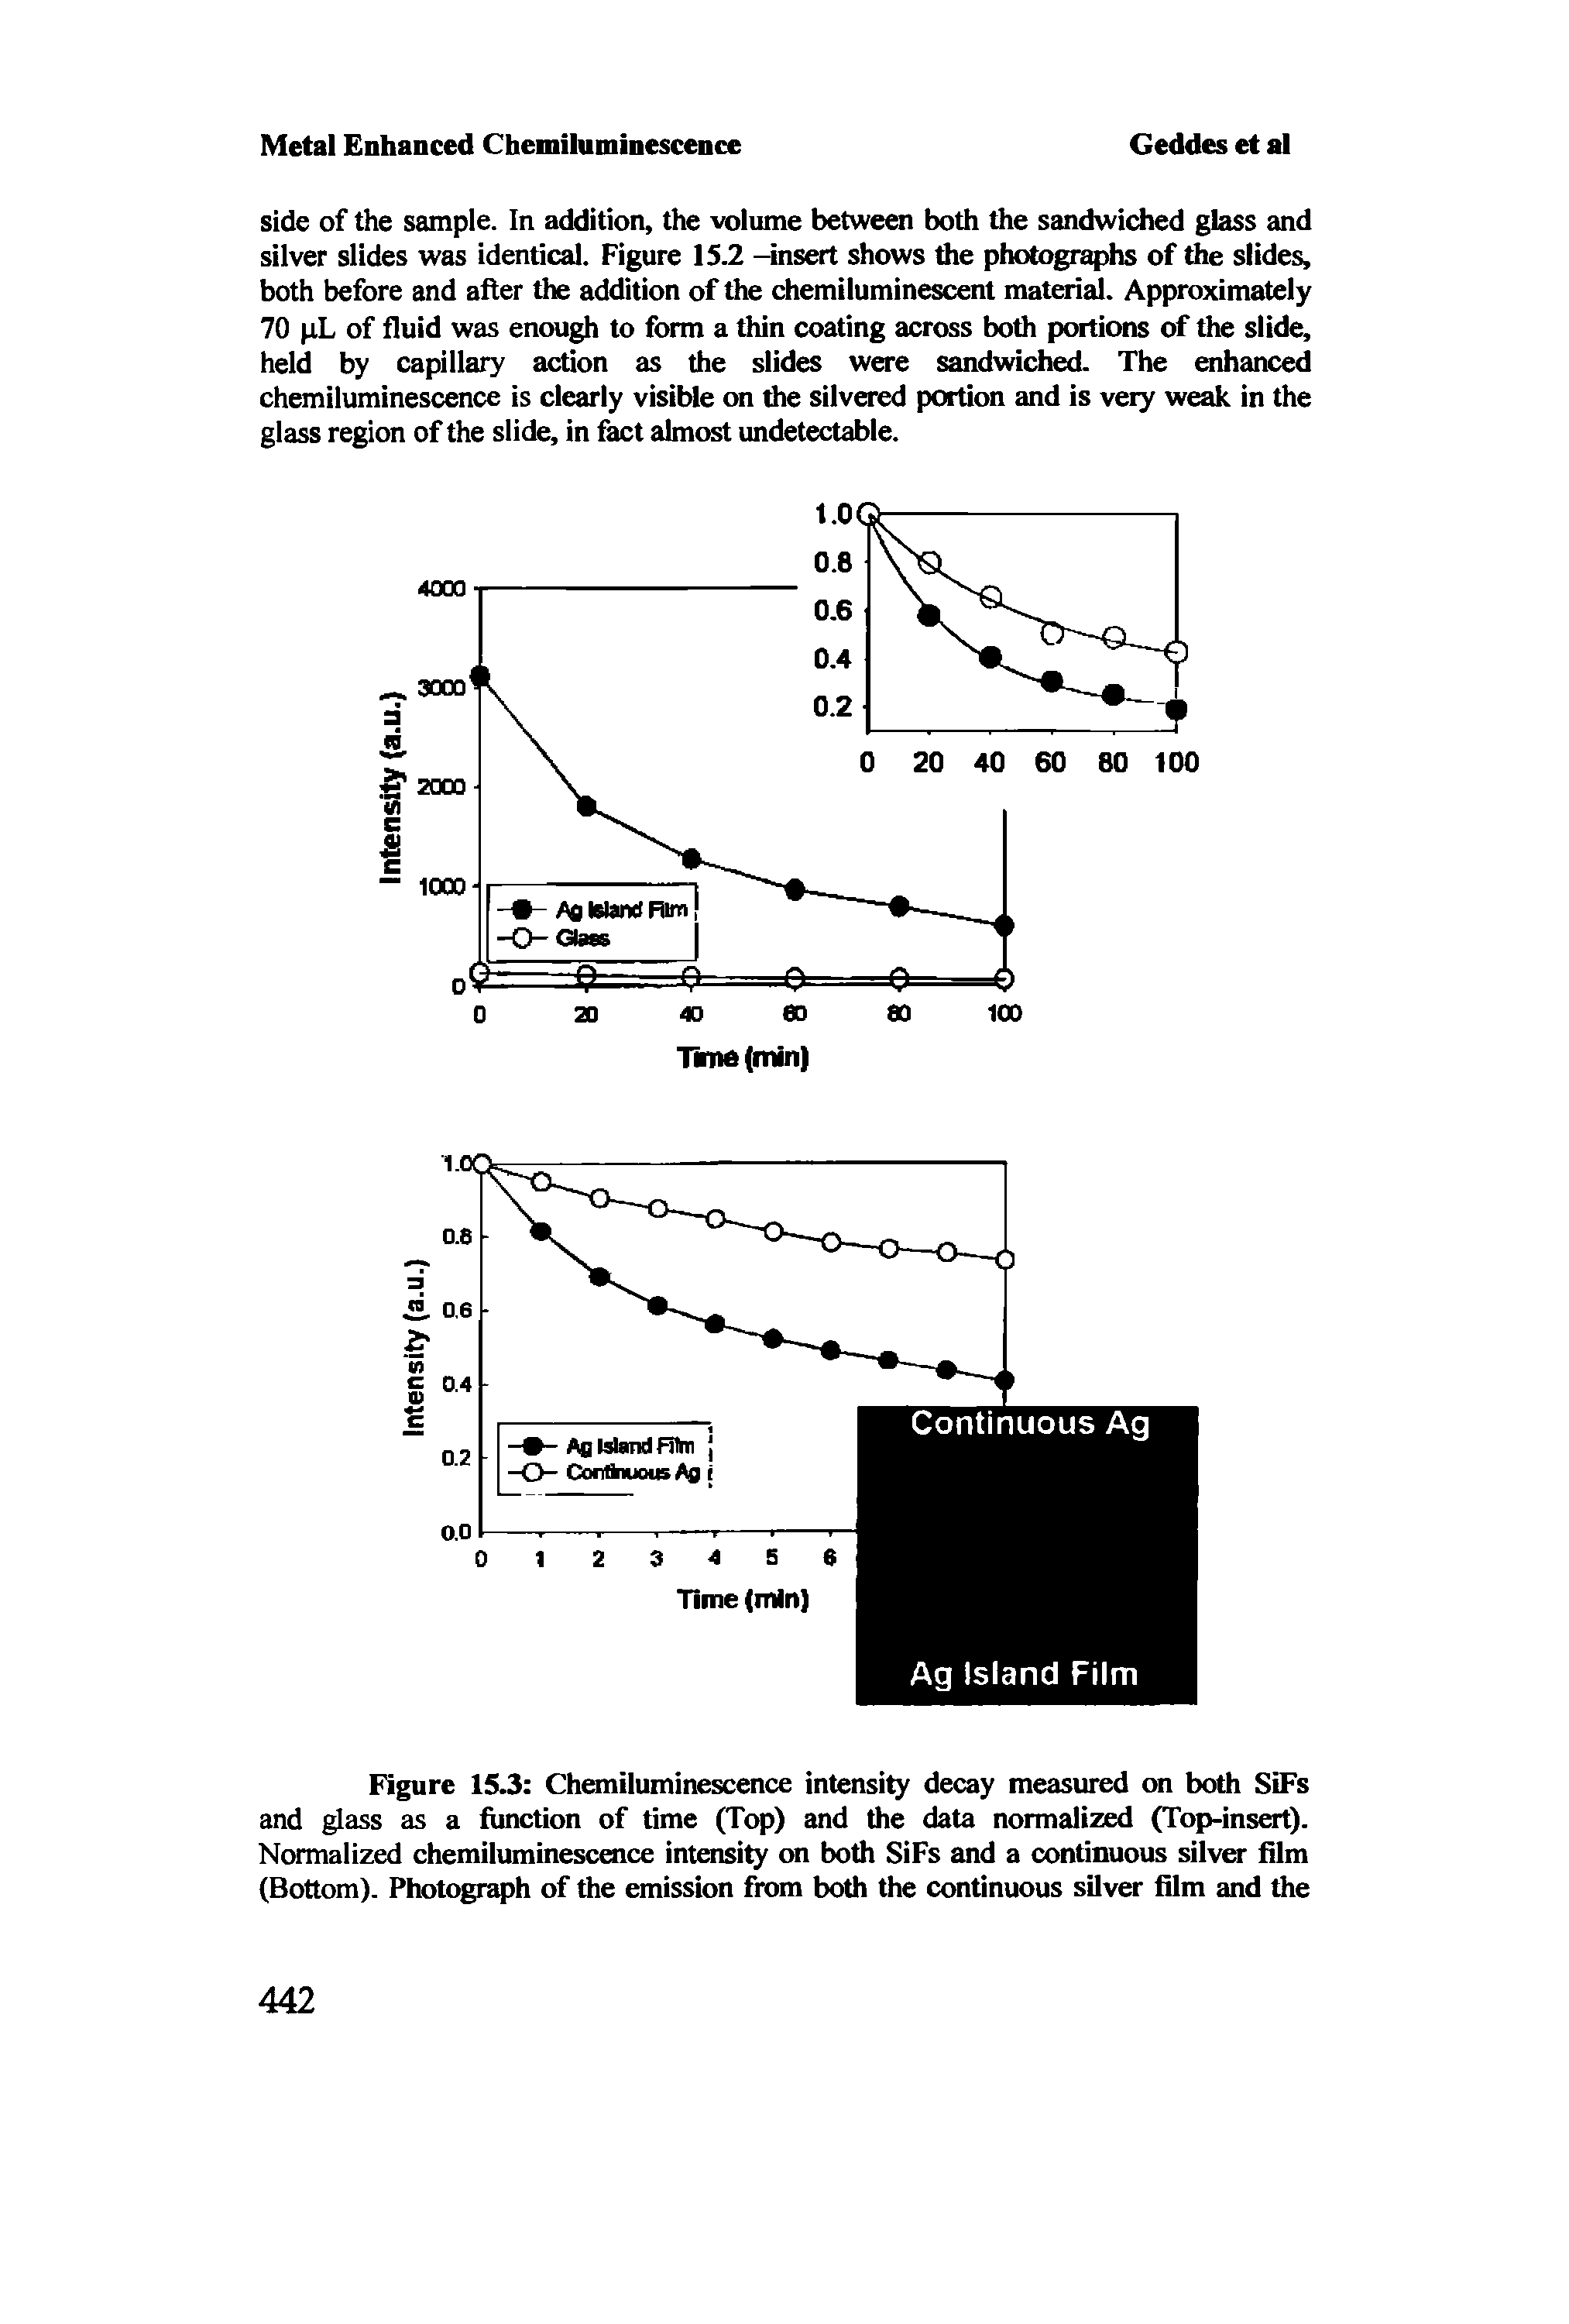 Figure 15.3 Chemiluminescence intensity decay measured on both SiFs and glass as a hinction of time (Top) and the data normalized (Top-insert). Normalized chemiluminescence intensity on both SiFs and a continuous silver film (Bottom). Photograph of the emission from both the continuous silver film and the...